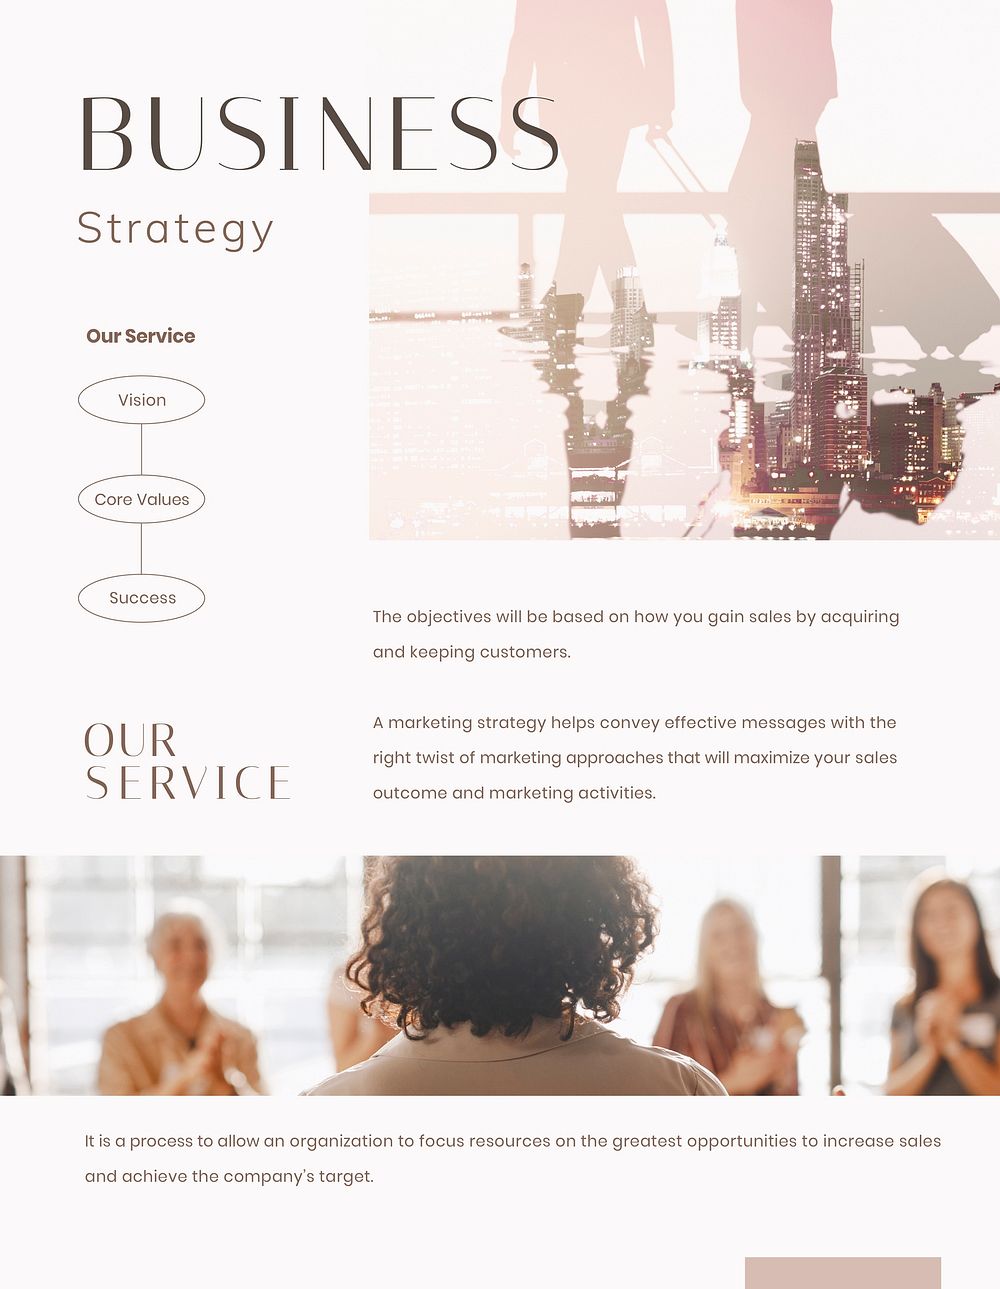 Business strategy flyer editable template, pink aesthetic design psd